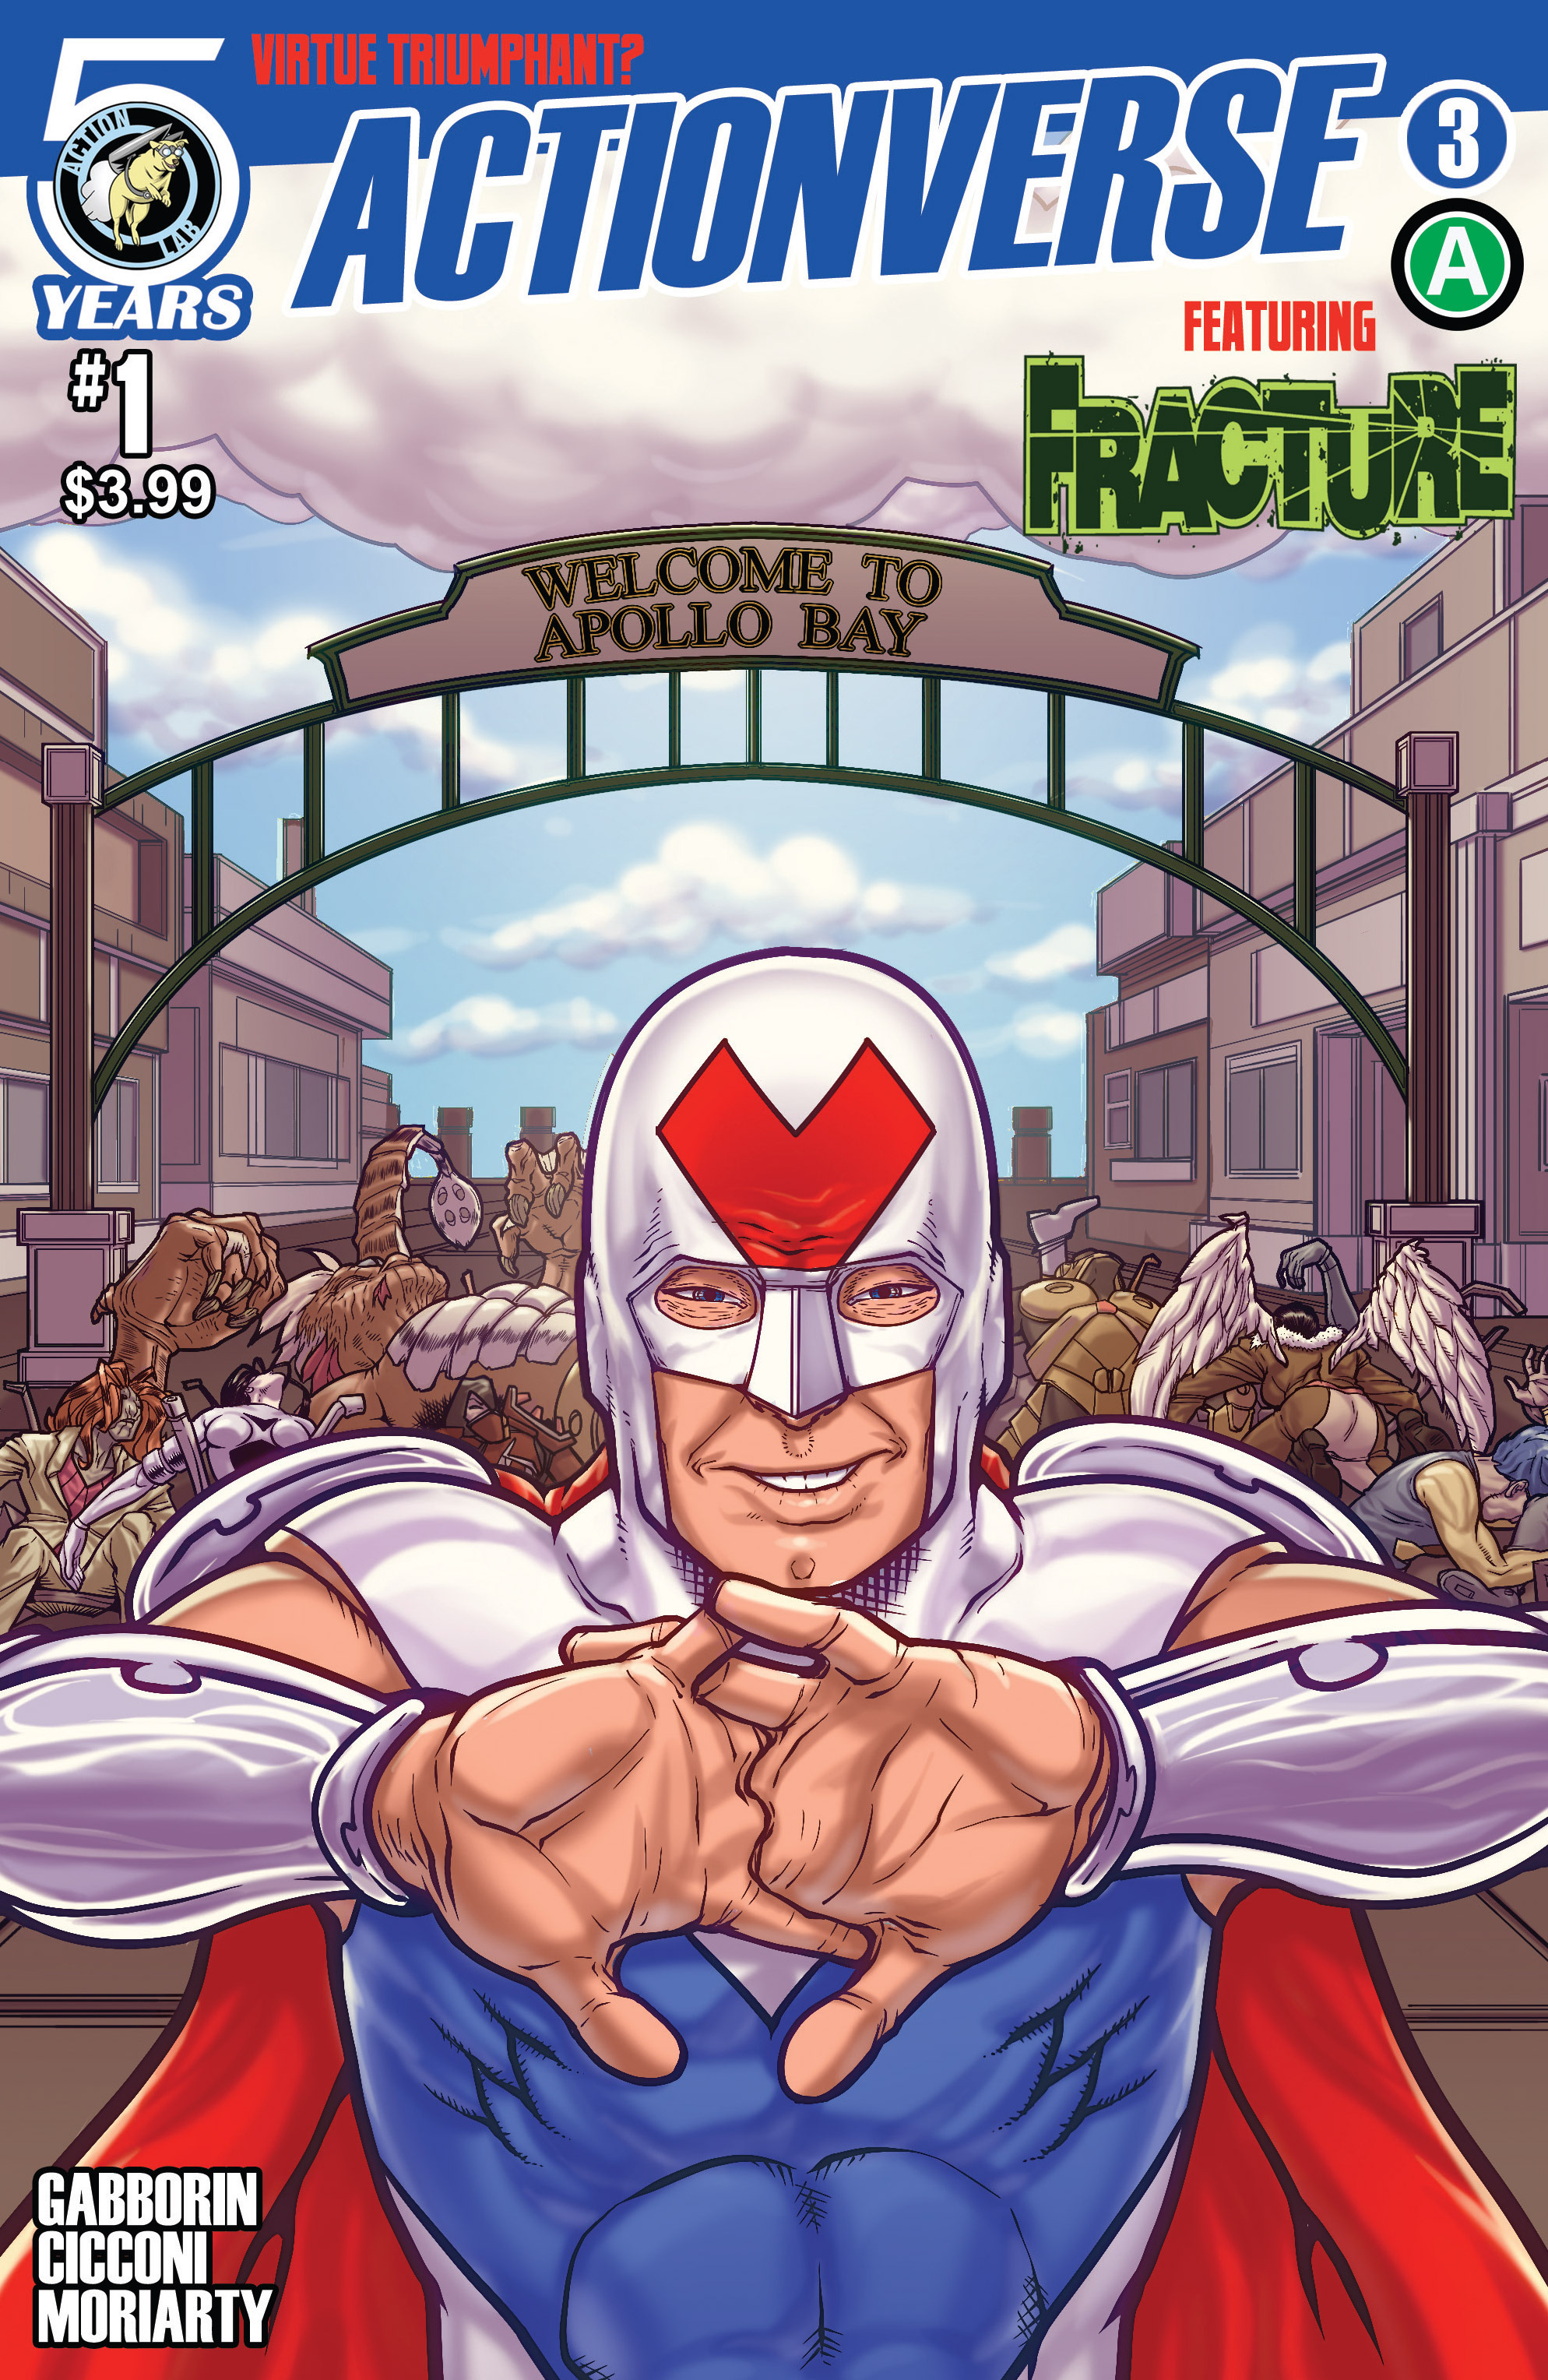 Read online Actionverse comic -  Issue #3 - 1